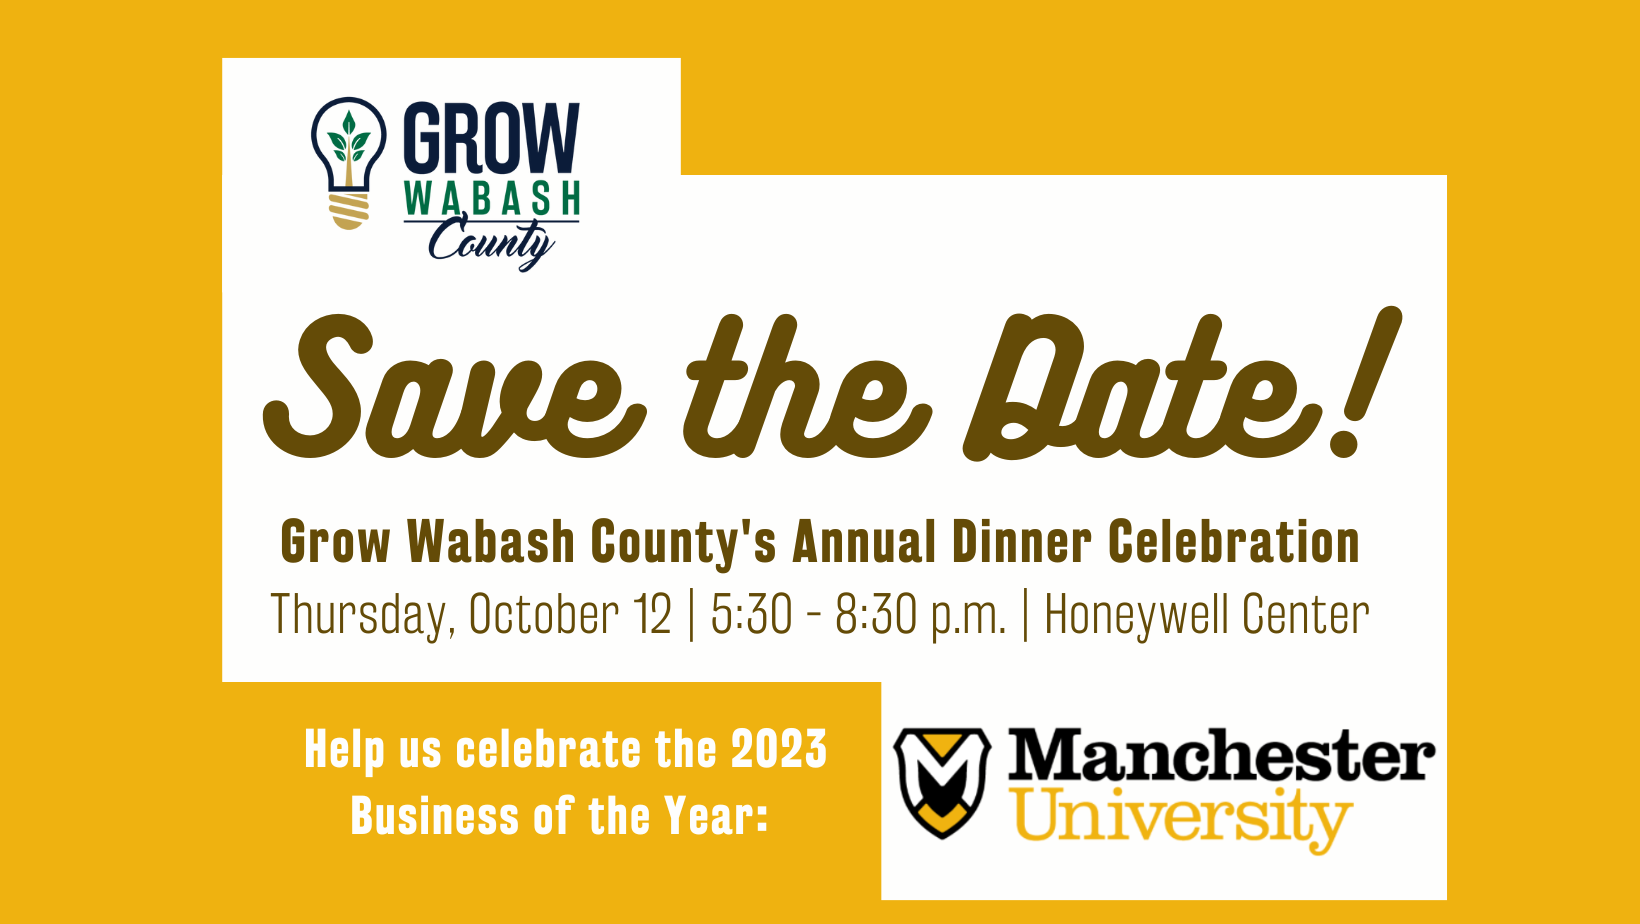 Manchester University to be recognized as 2023 Business of the Year Main Photo